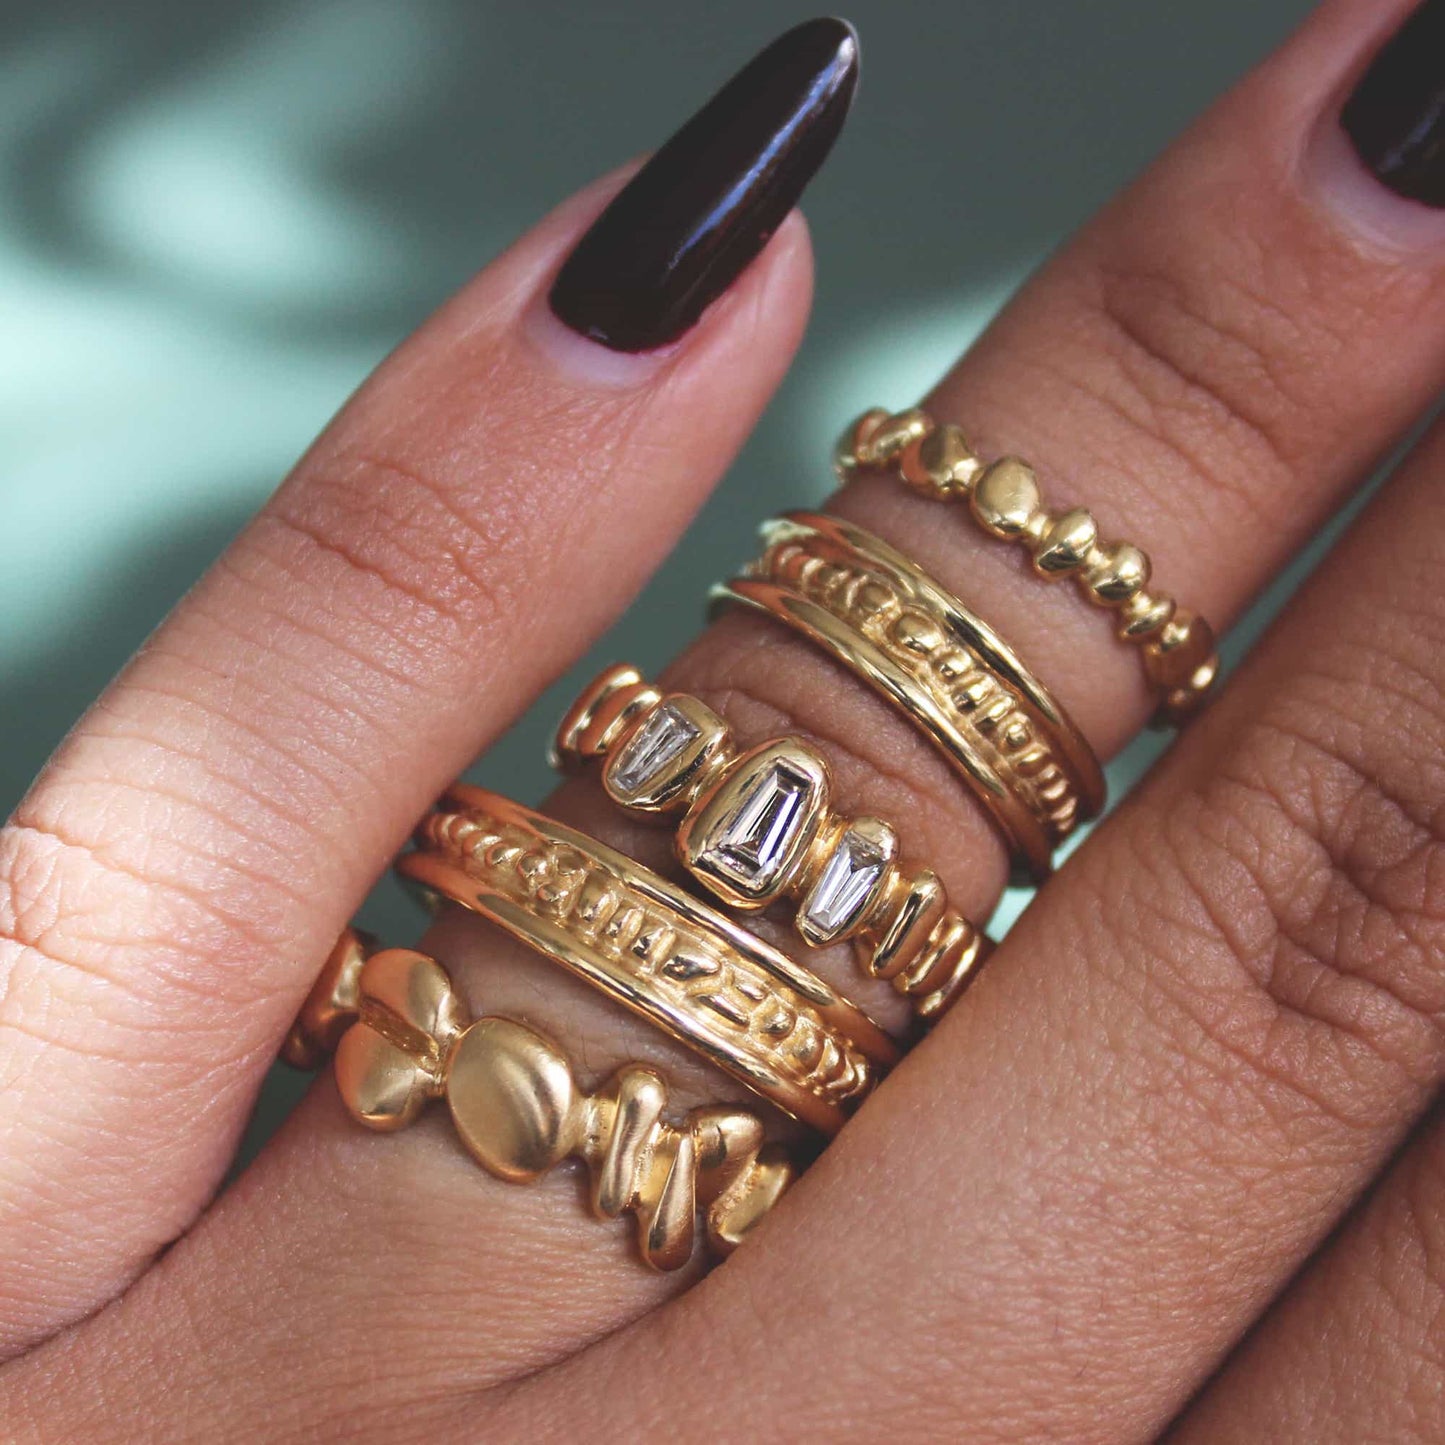 Model wears various bands from Ruins collection on ring finger including Ruins Band / Thin